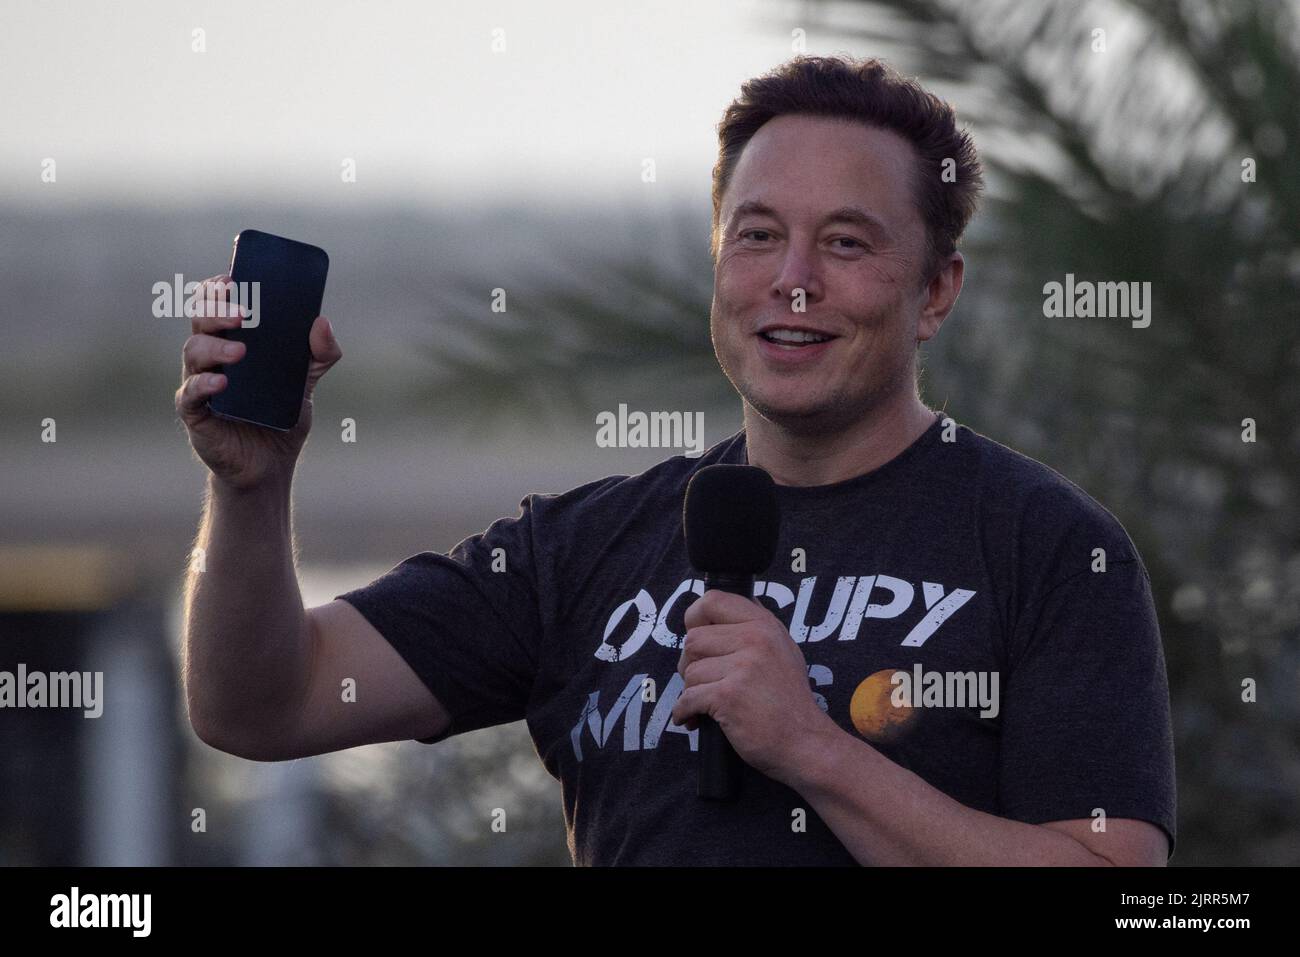 SpaceX Chief Engineer Elon Musk raises his phone during a joint news conference with T-Mobile CEO Mike Sievert at the SpaceX Starbase, in Brownsville, Texas, U.S., August 25, 2022. REUTERS/Adrees Latif Stock Photo